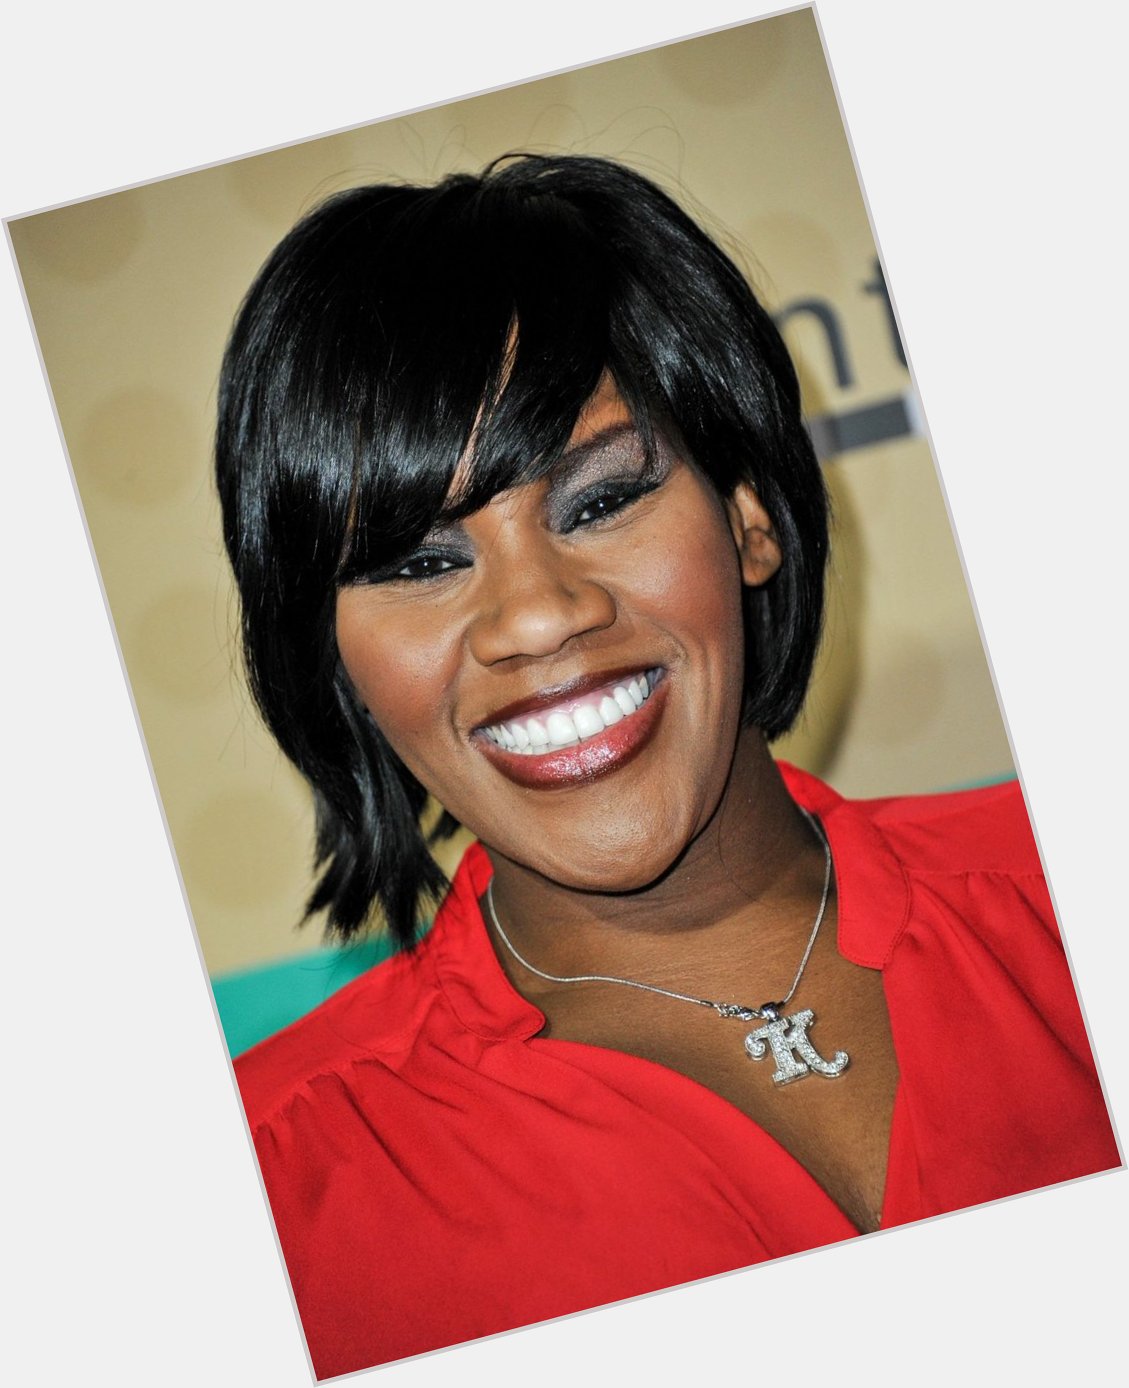 Happy Birthday to six-time Grammy-nominated American R&B singer and songwriter Kelly Price! She turns 44 today. 